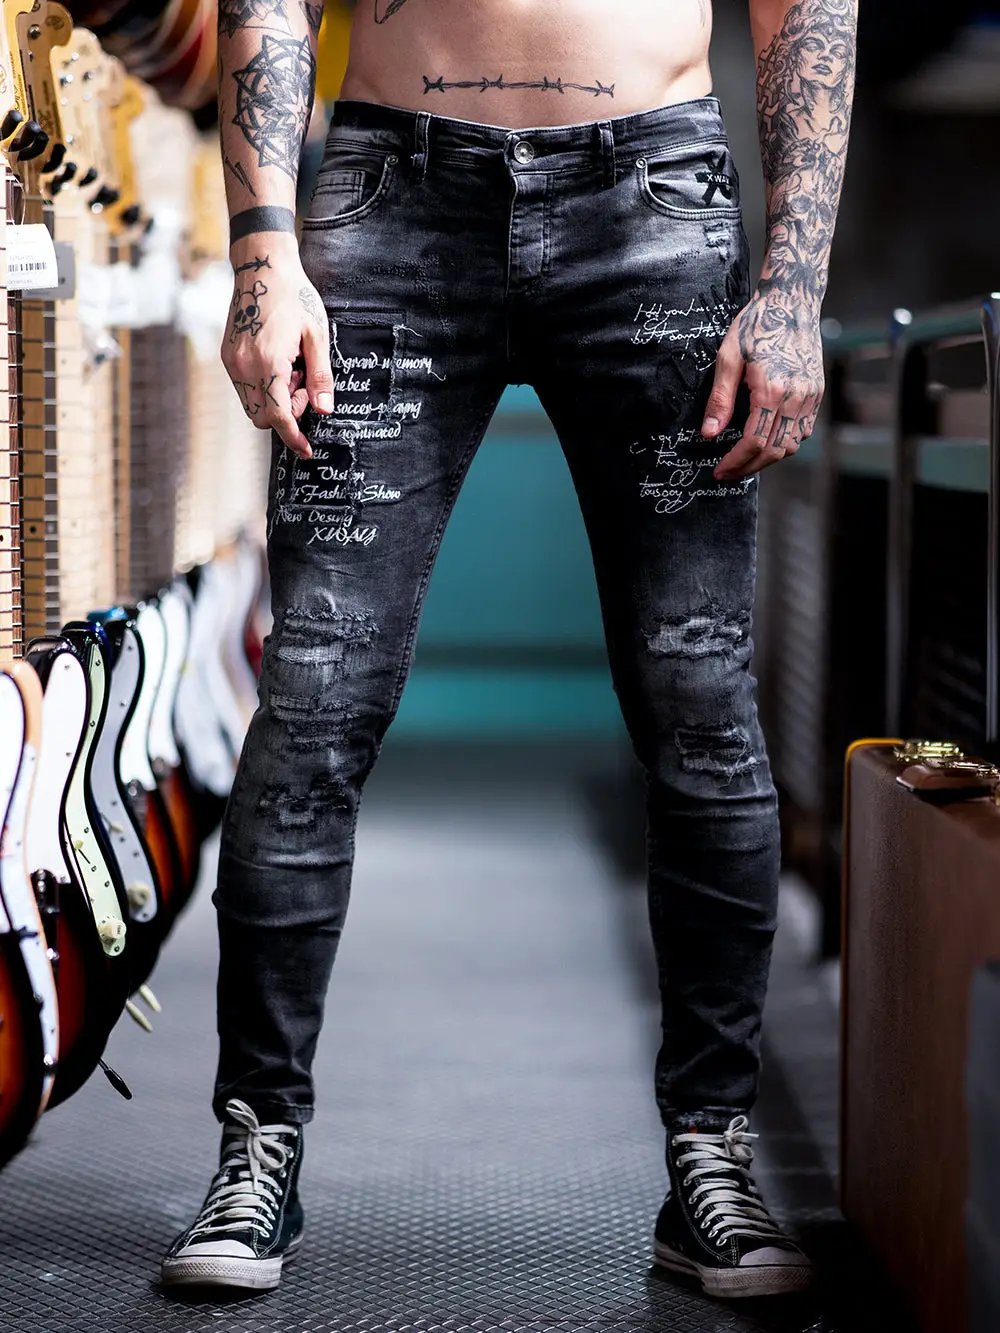 Photo of the lower half of a man with tattoos standing wearing BLACK STONE jeans by SERNES. The distressed jeans has embroidered text on it.